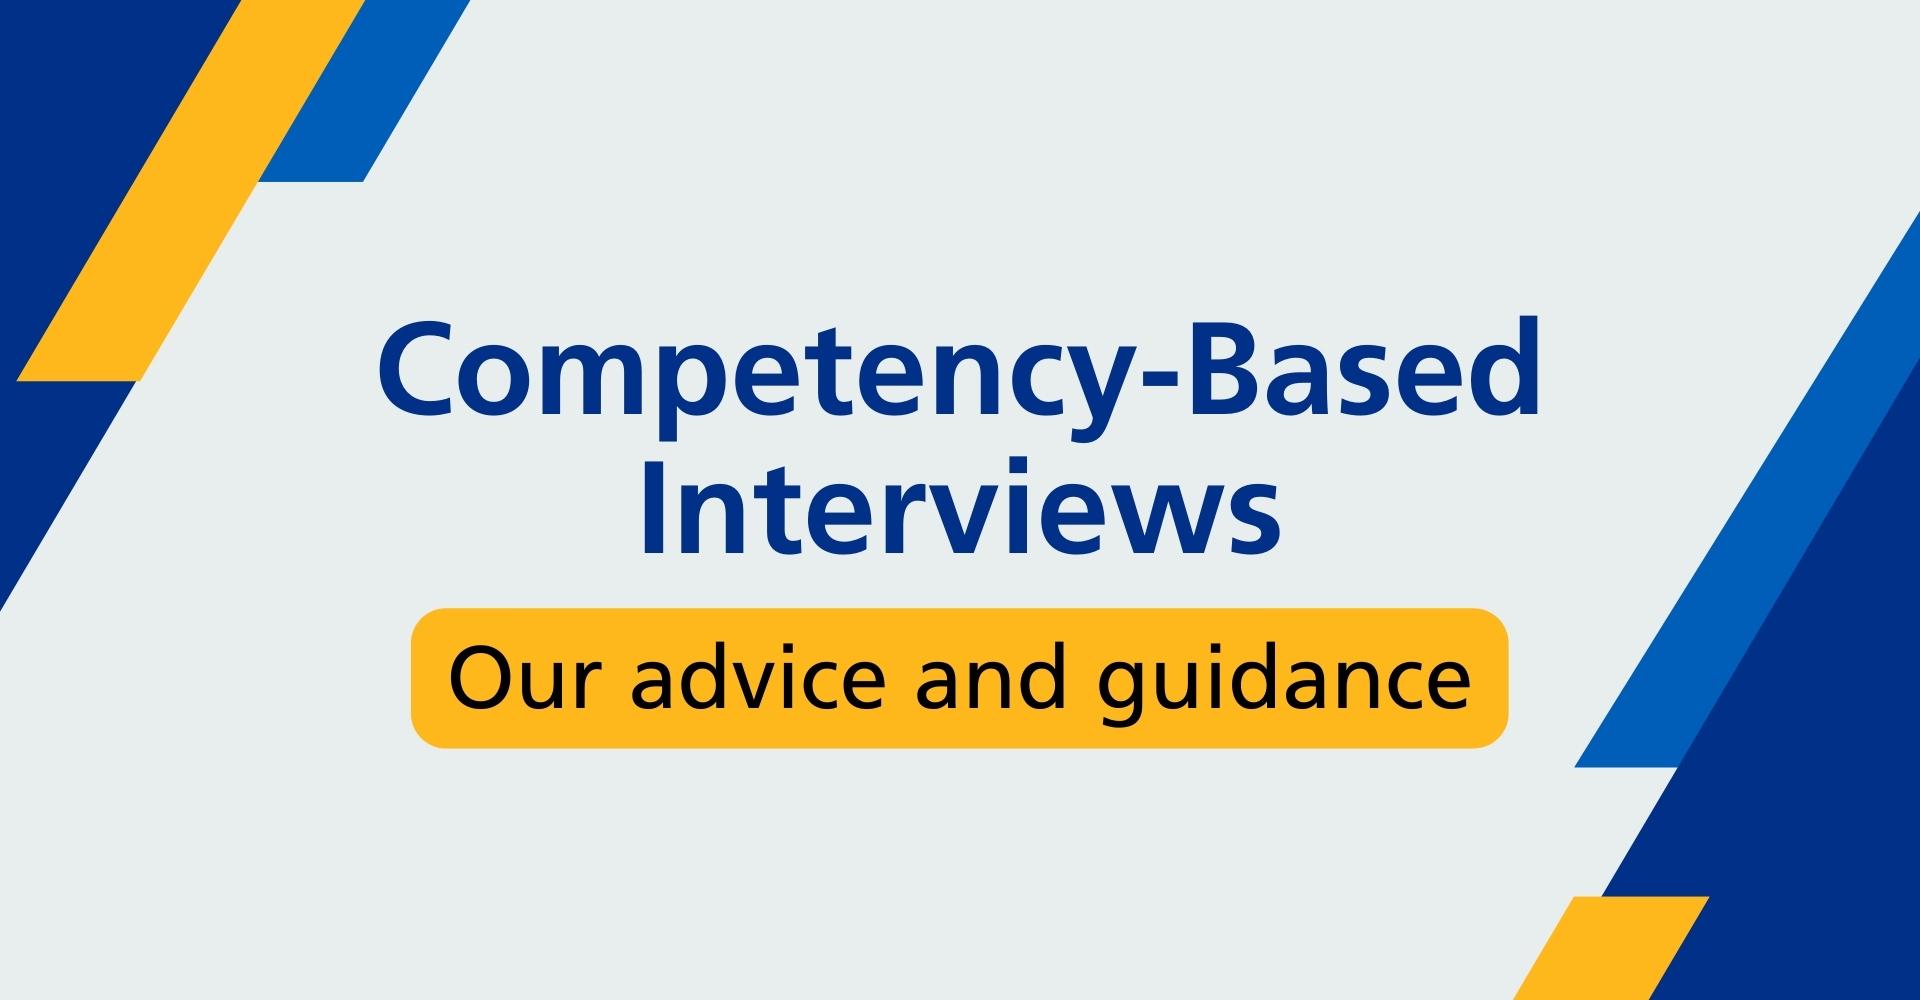 Competency-Based Interviews: Our Advice